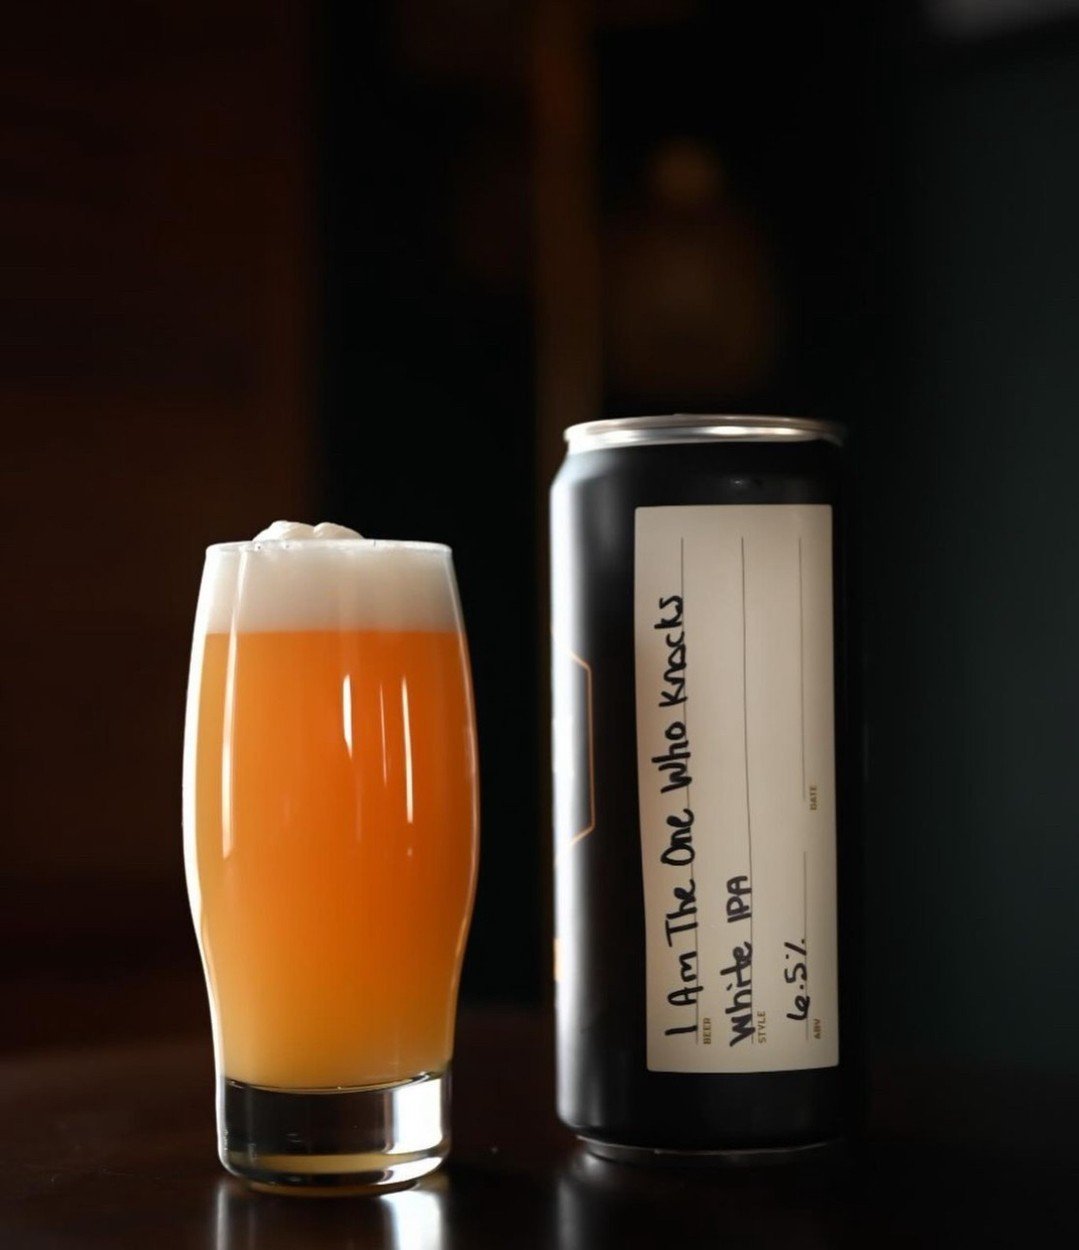 🍻 New small-batch from brewer Brittany:⁠
⁠
This Belgian White IPA is brewed with Pilsner malt and two types of wheat for a bready malt backbone and silky mouthfeel. Fermentation with Belgian witbier yeasts imparts notes of stone fruit, while a hefty